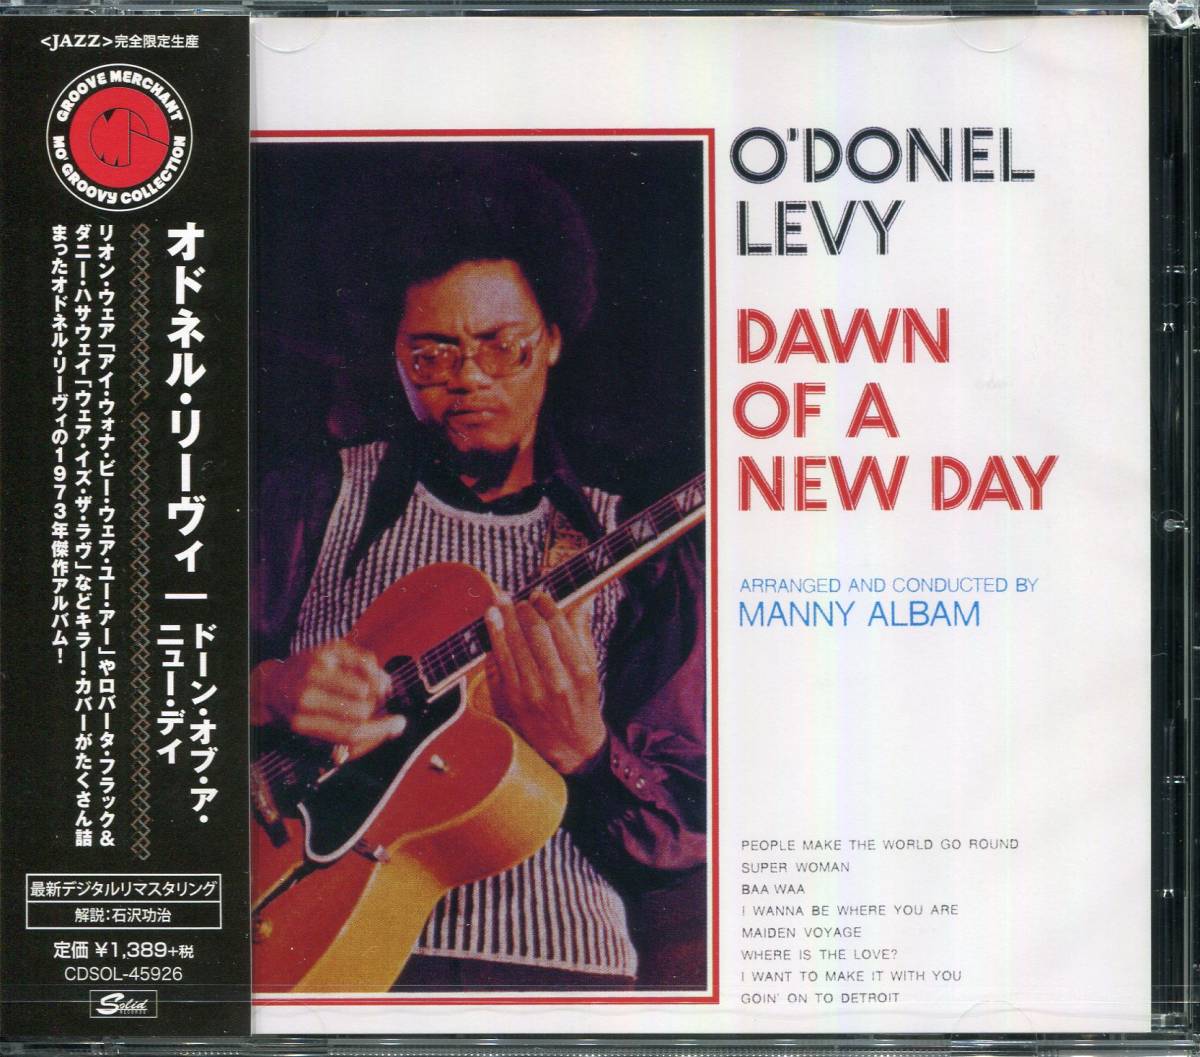 Rare Groove/Jazz Funk■O'DONEL LEVY / Dawn Of A New Day (1973) 2018年最新プレス!! デジタル・リマスタリング仕様!!の画像1